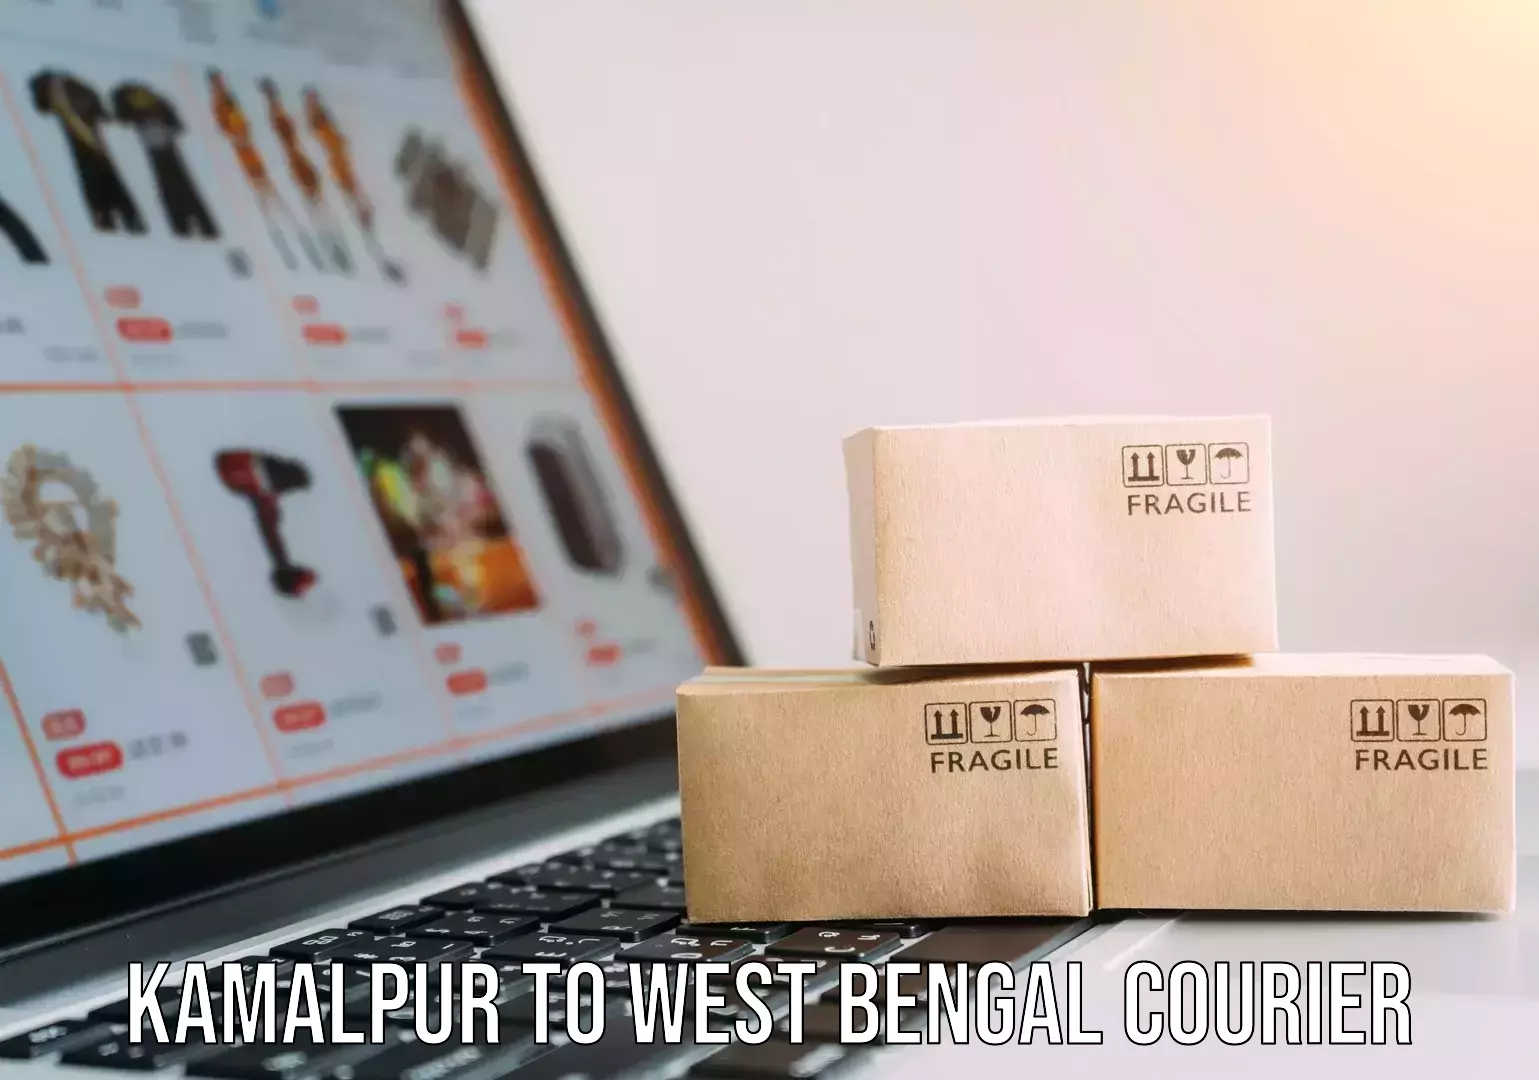 Seamless shipping experience Kamalpur to West Bengal